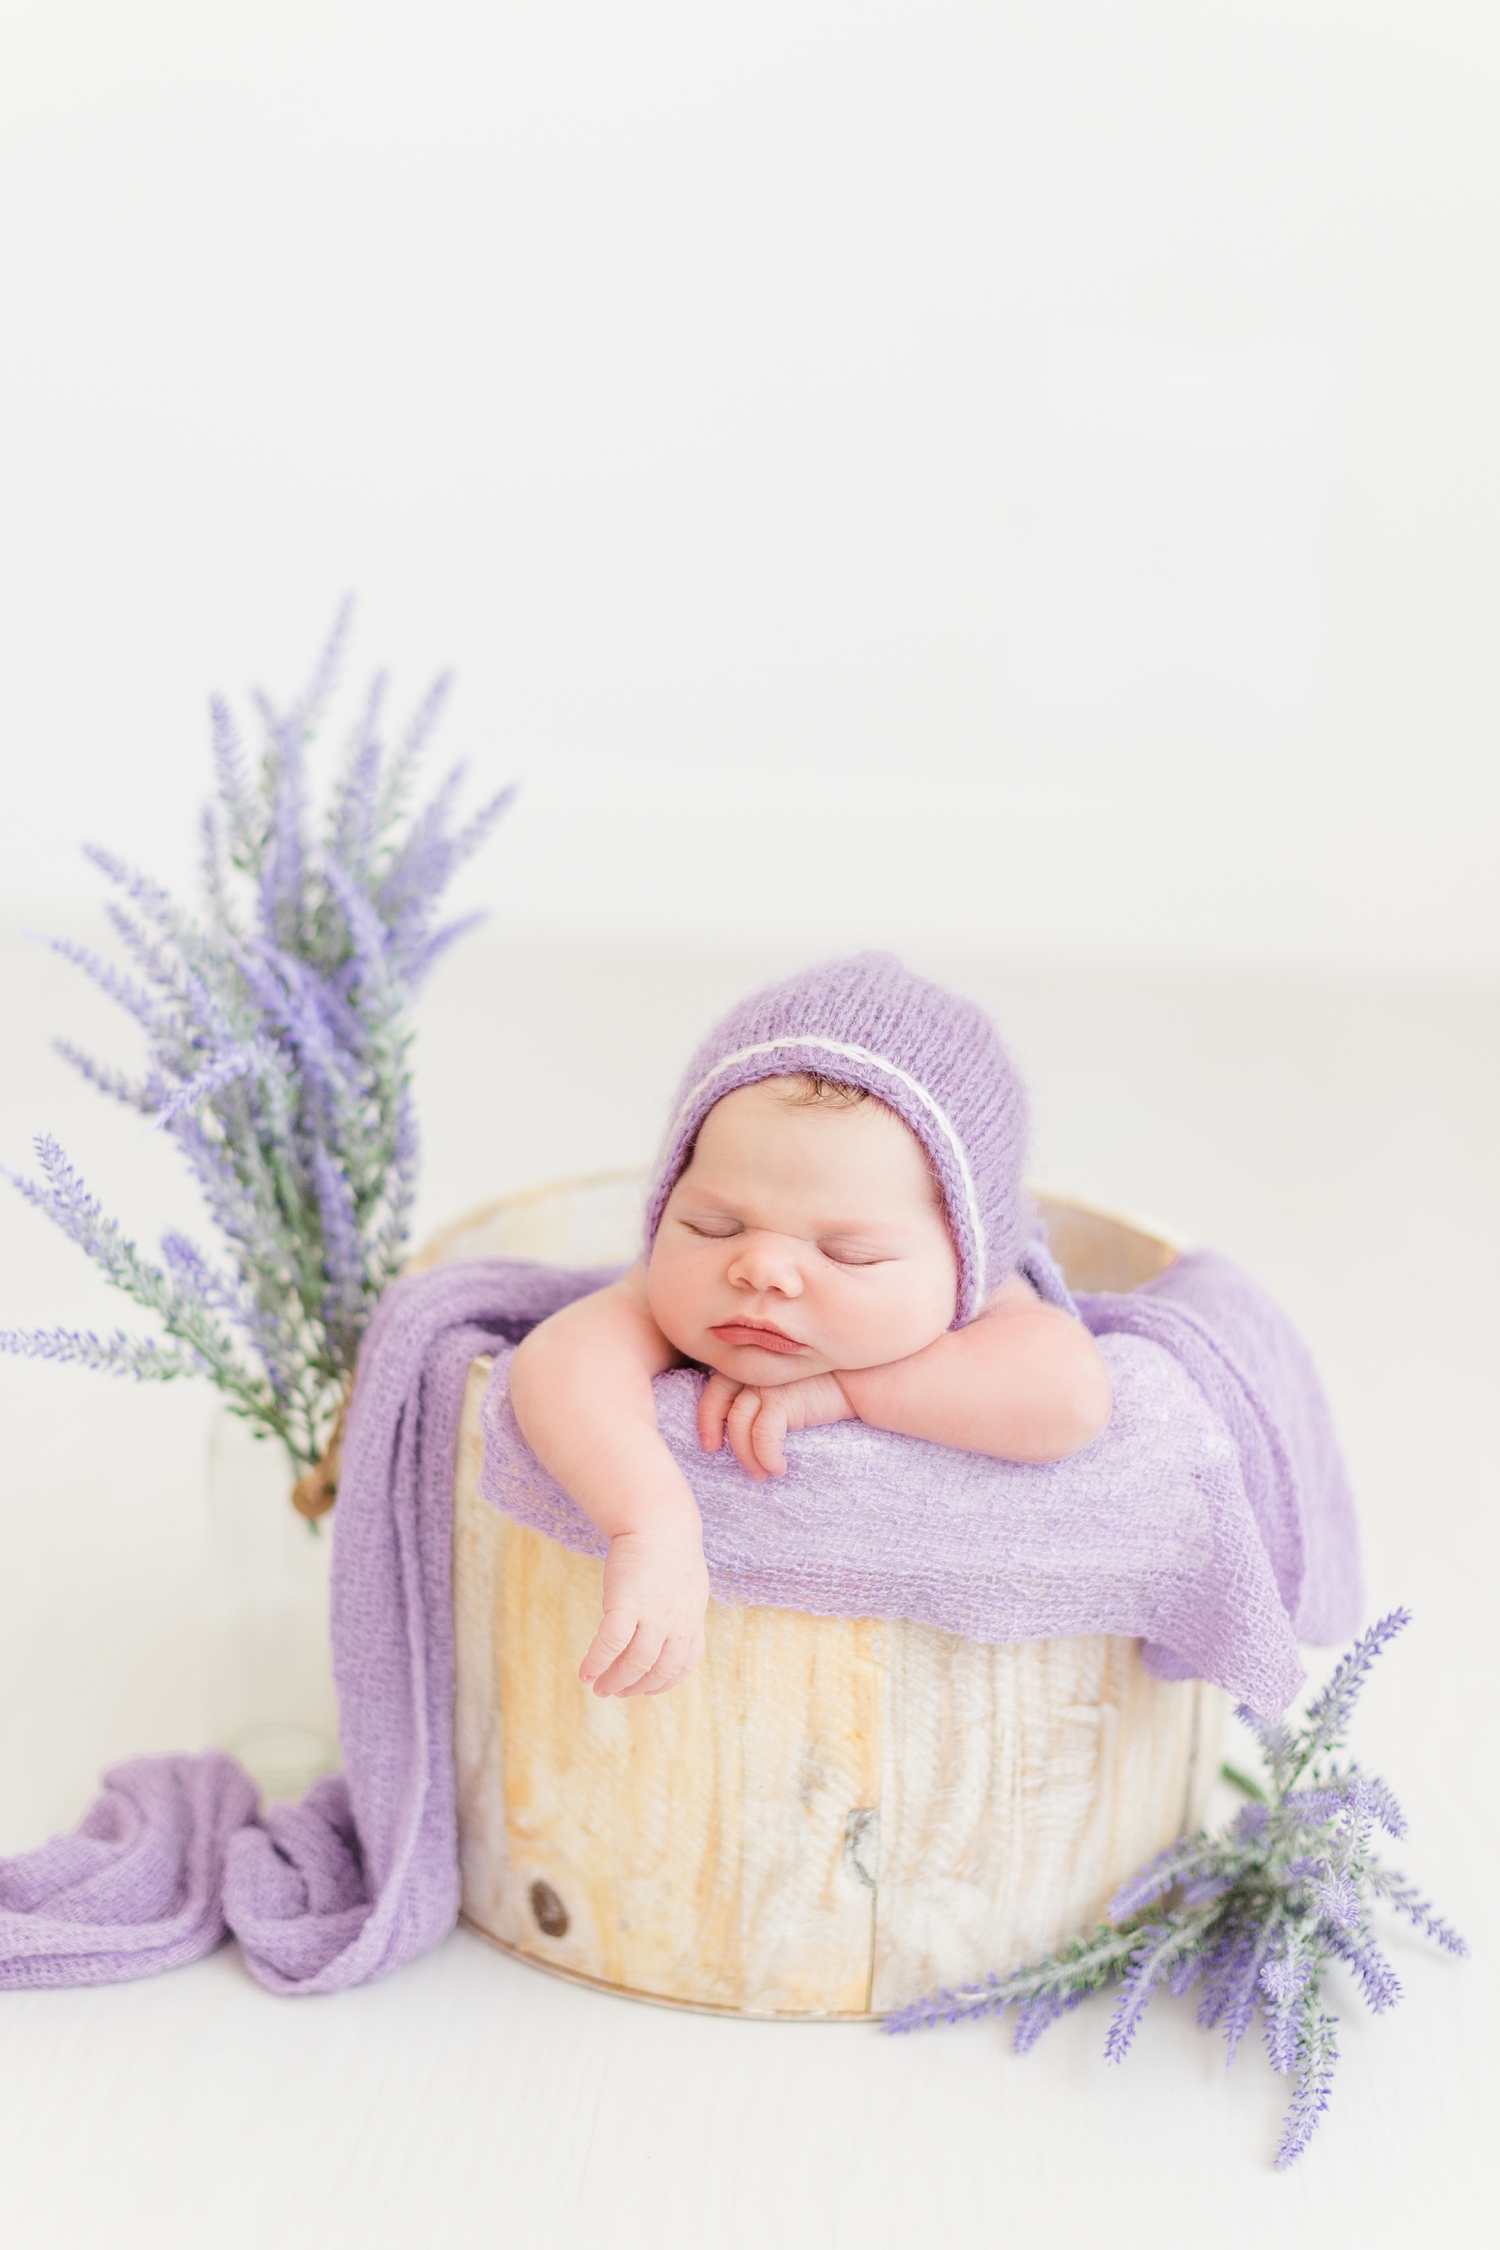 Baby Emersyn wearing a purple bonnet is snuggly nestled in a bucket surrounded by lavender | CB Studio